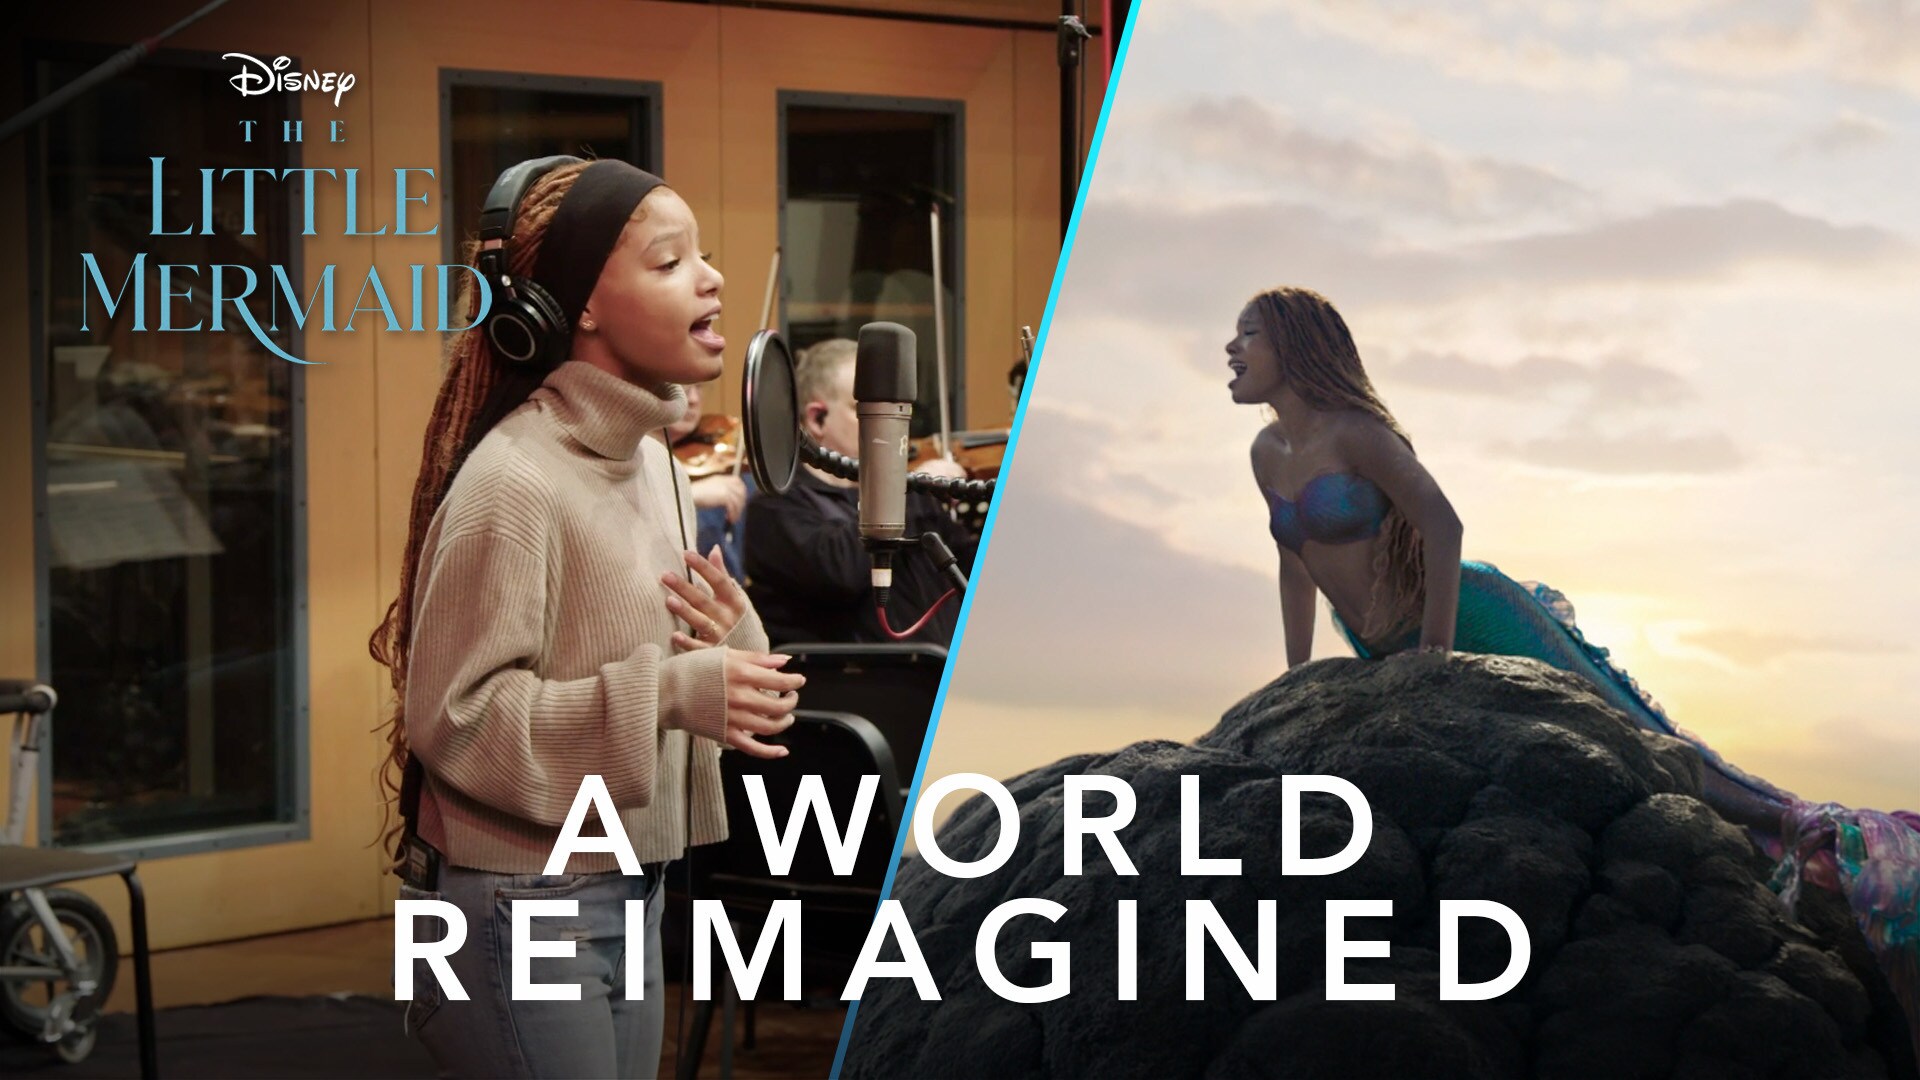 The Little Mermaid | A World Reimagined